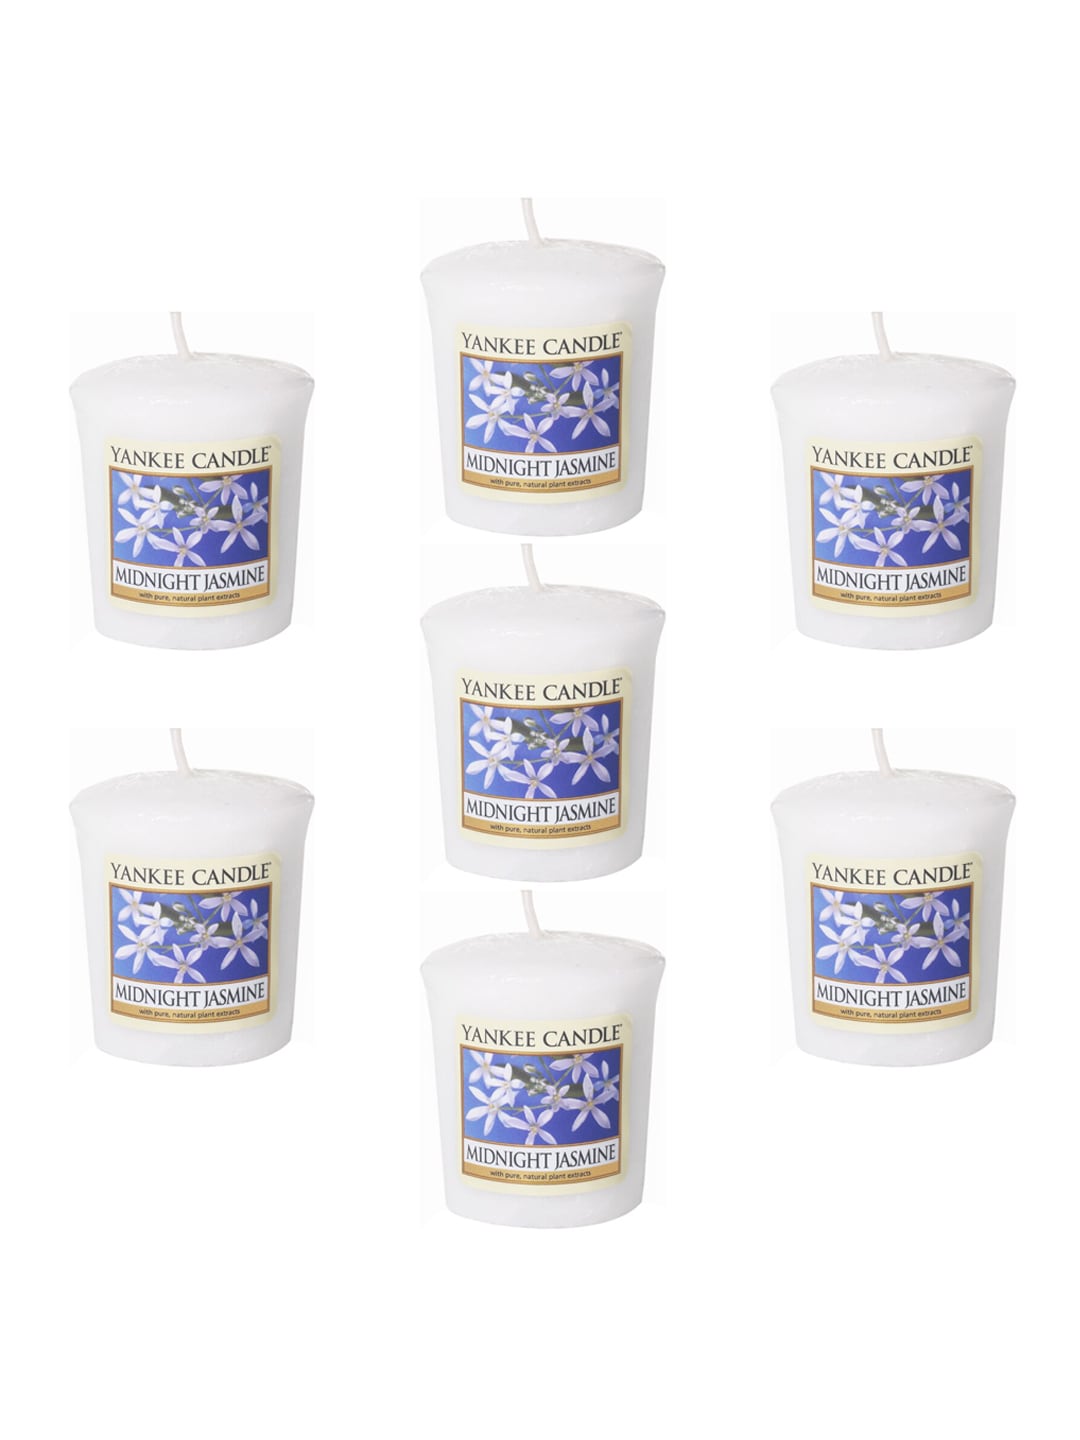 YANKEE CANDLE Set Of 7 White Solid Classic Votive Midnight Jasmine Scented Candles Price in India